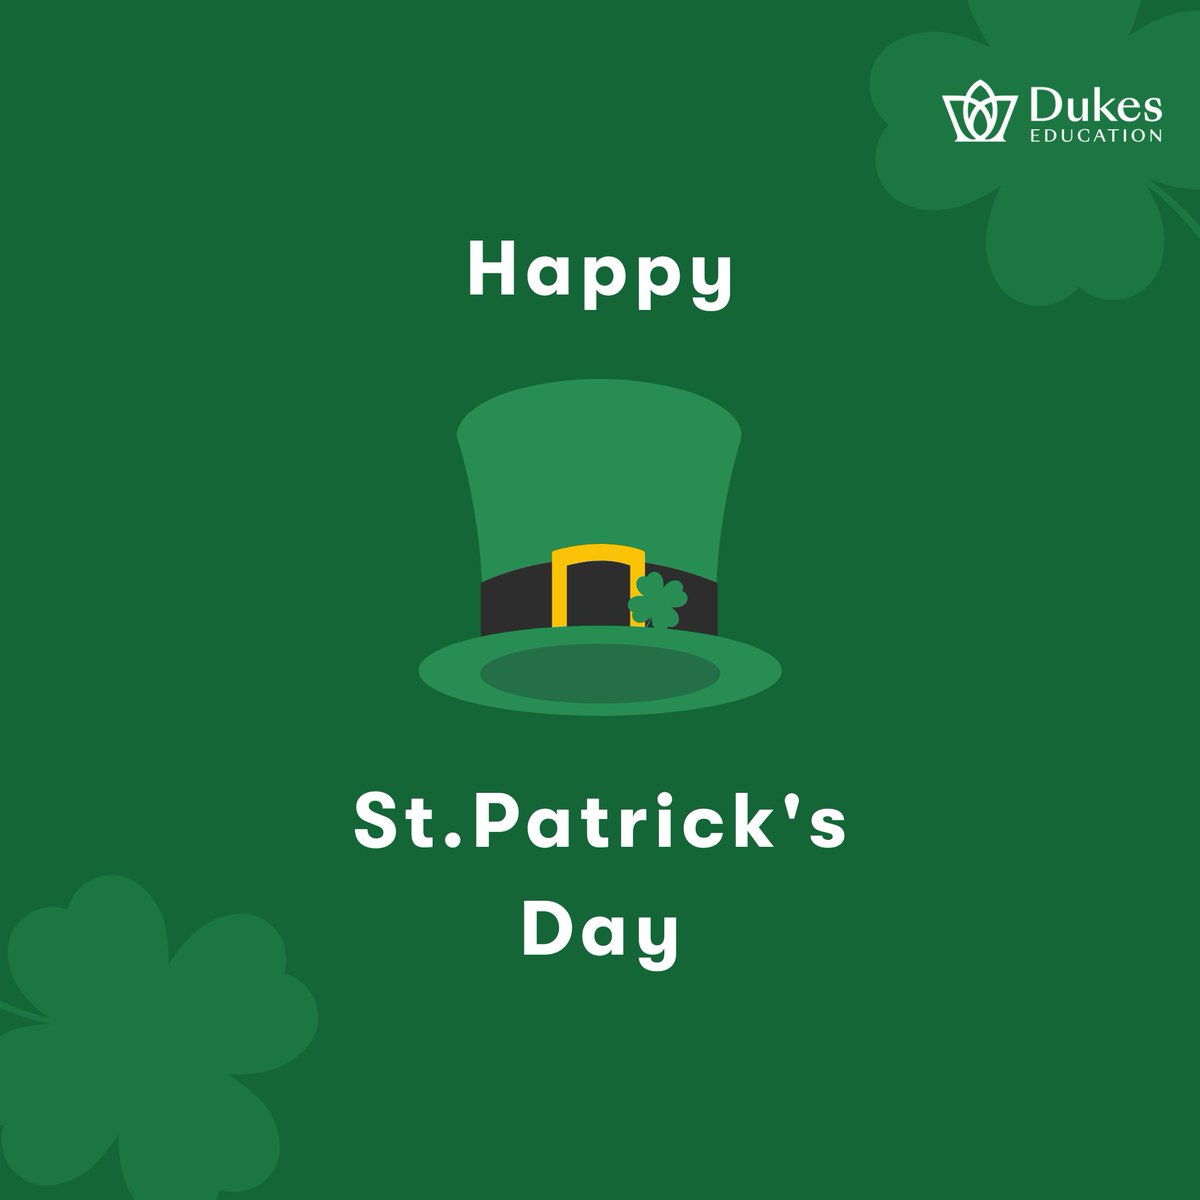 We’d like to wish a happy #StPatricksDay to people celebrating everywhere, as well as to our students and colleagues from @IOE_Dublin and @brucecollege1, and across the Dukes Education family.